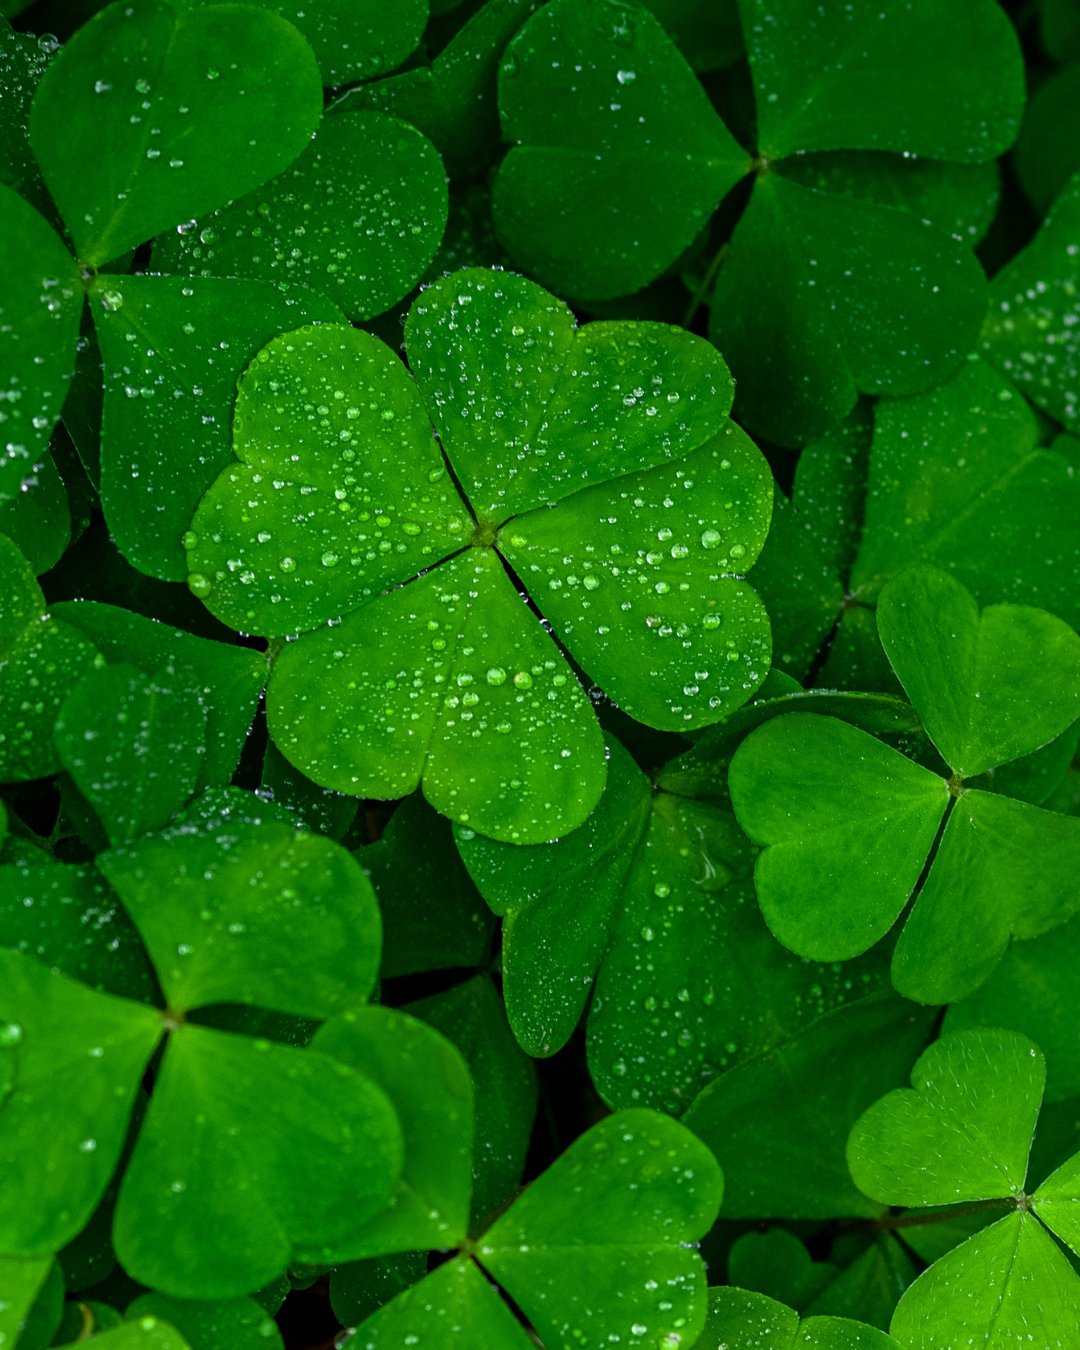 What is the meaning of the four leaved clover? - LATELITA